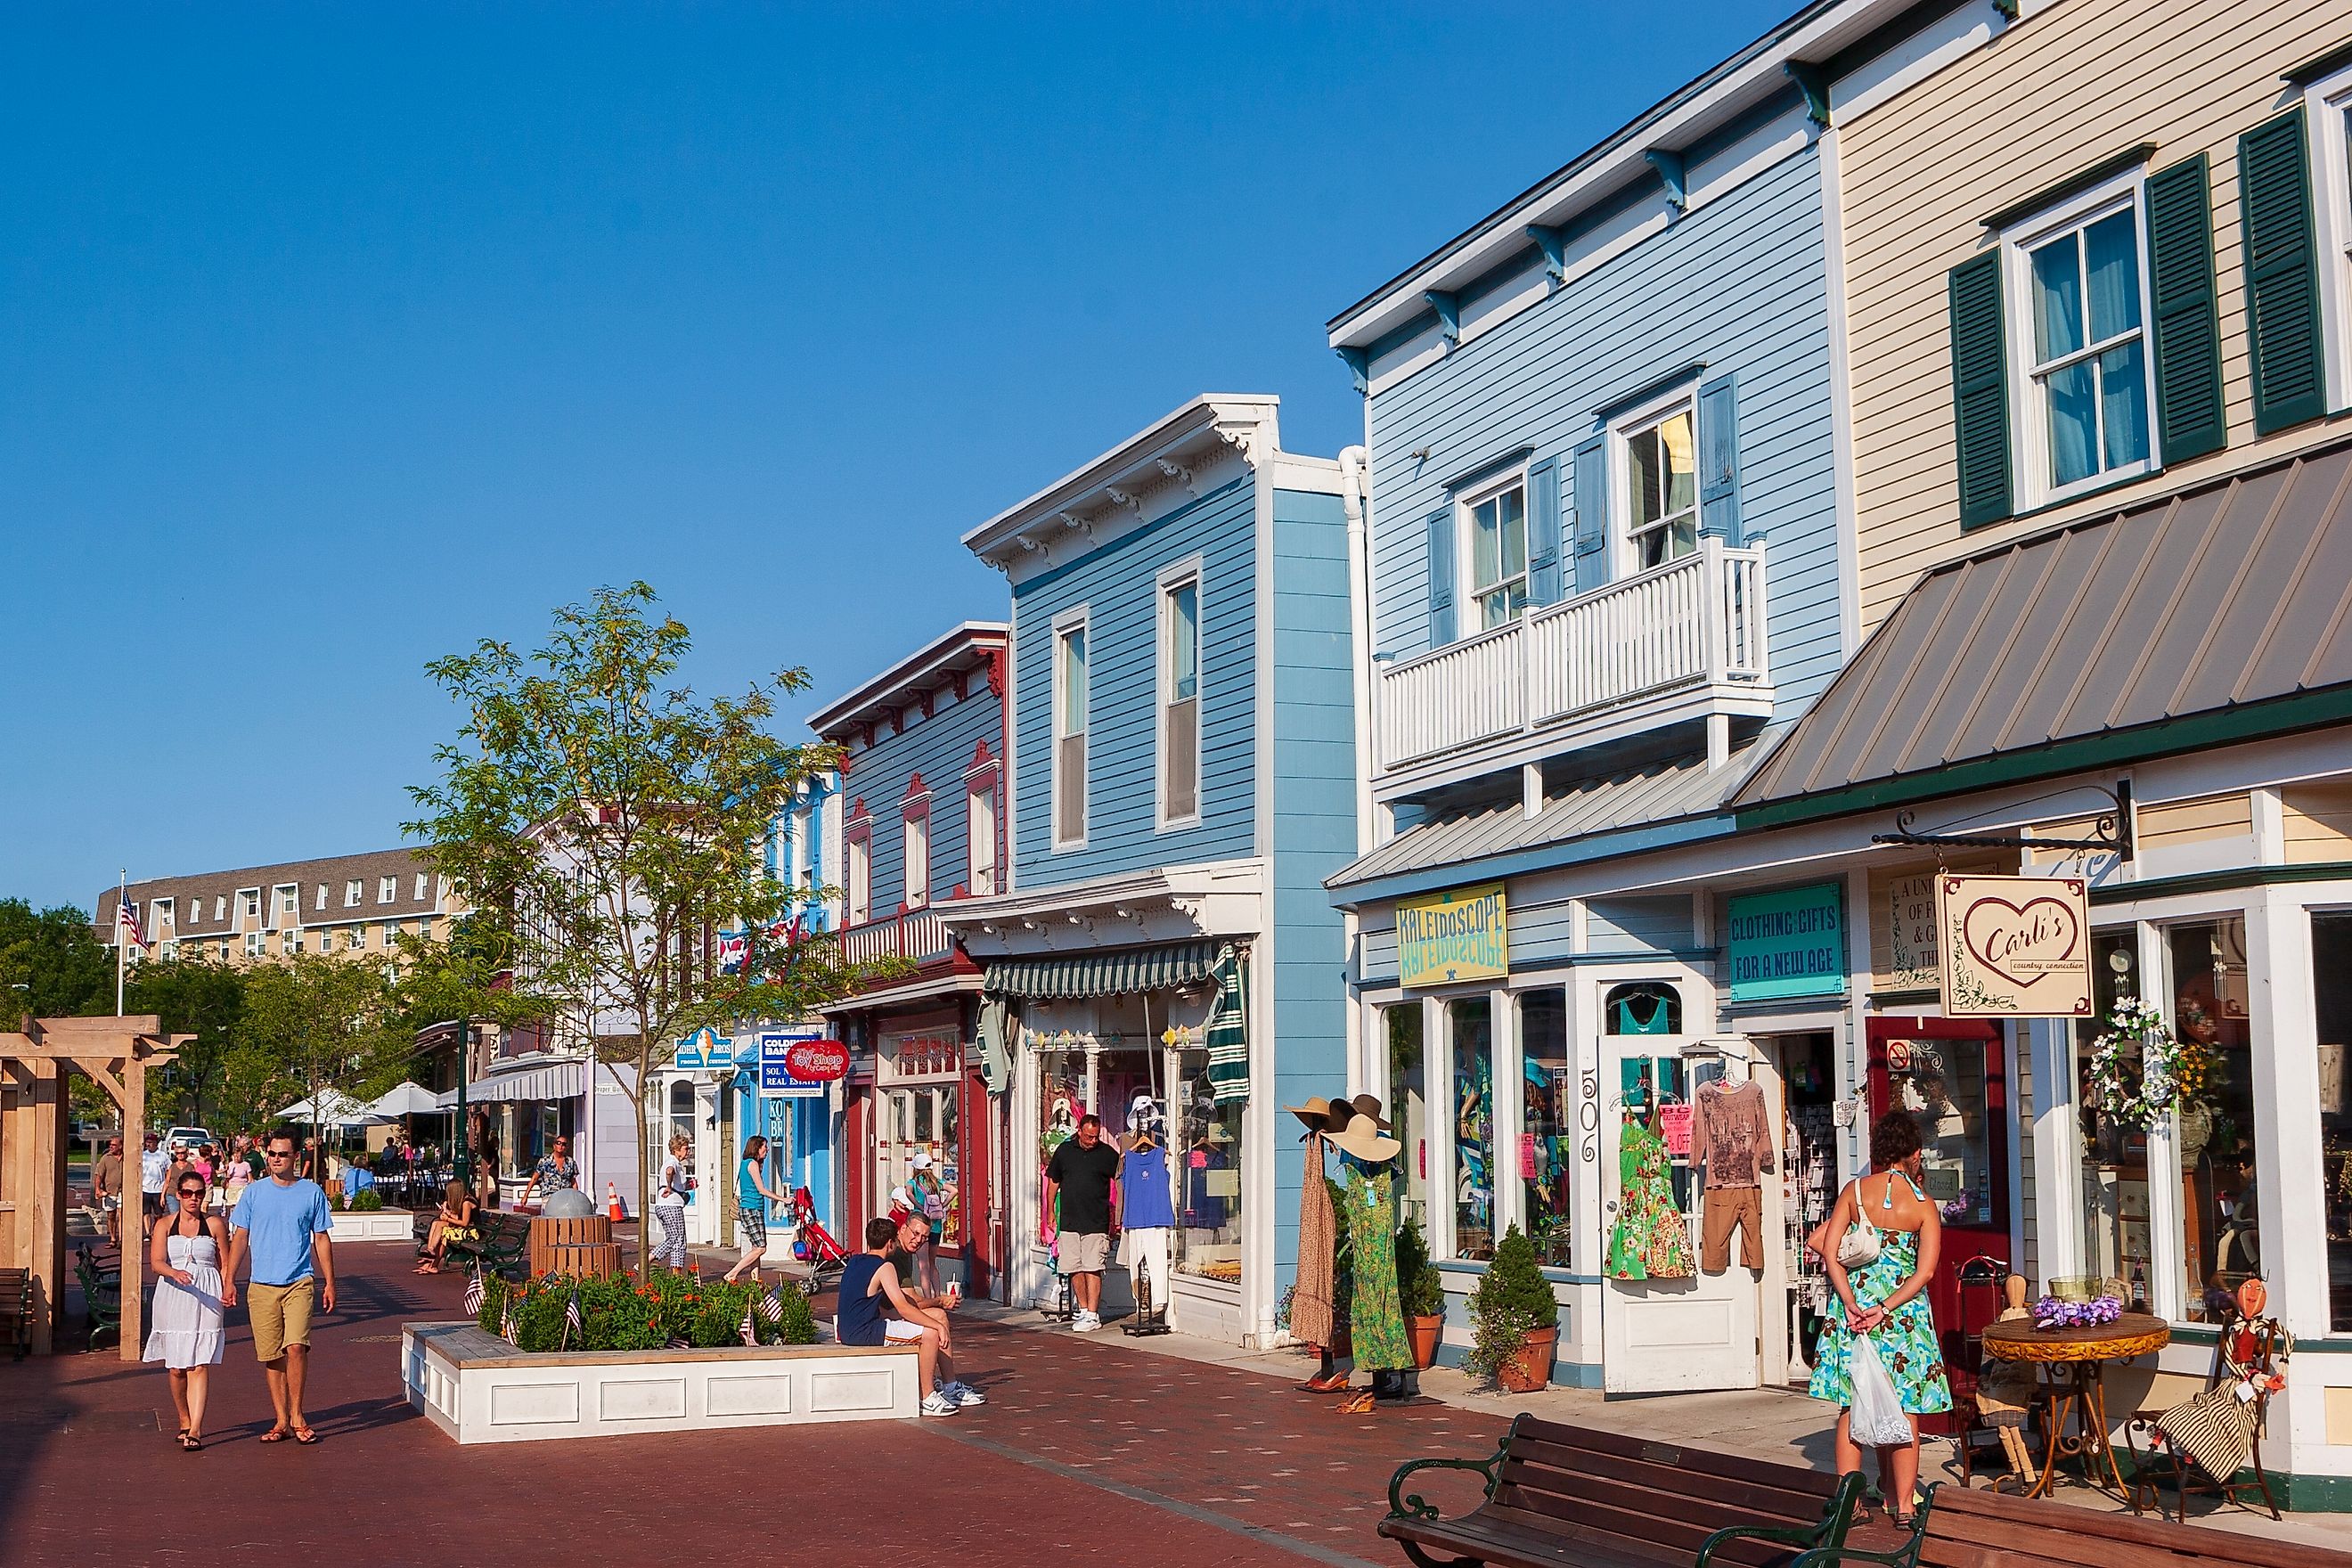 Cape May: Washington Street Mall bustles with visitors amid quaint boutiques and eateries. Editorial credit: JWCohen / Shutterstock.com